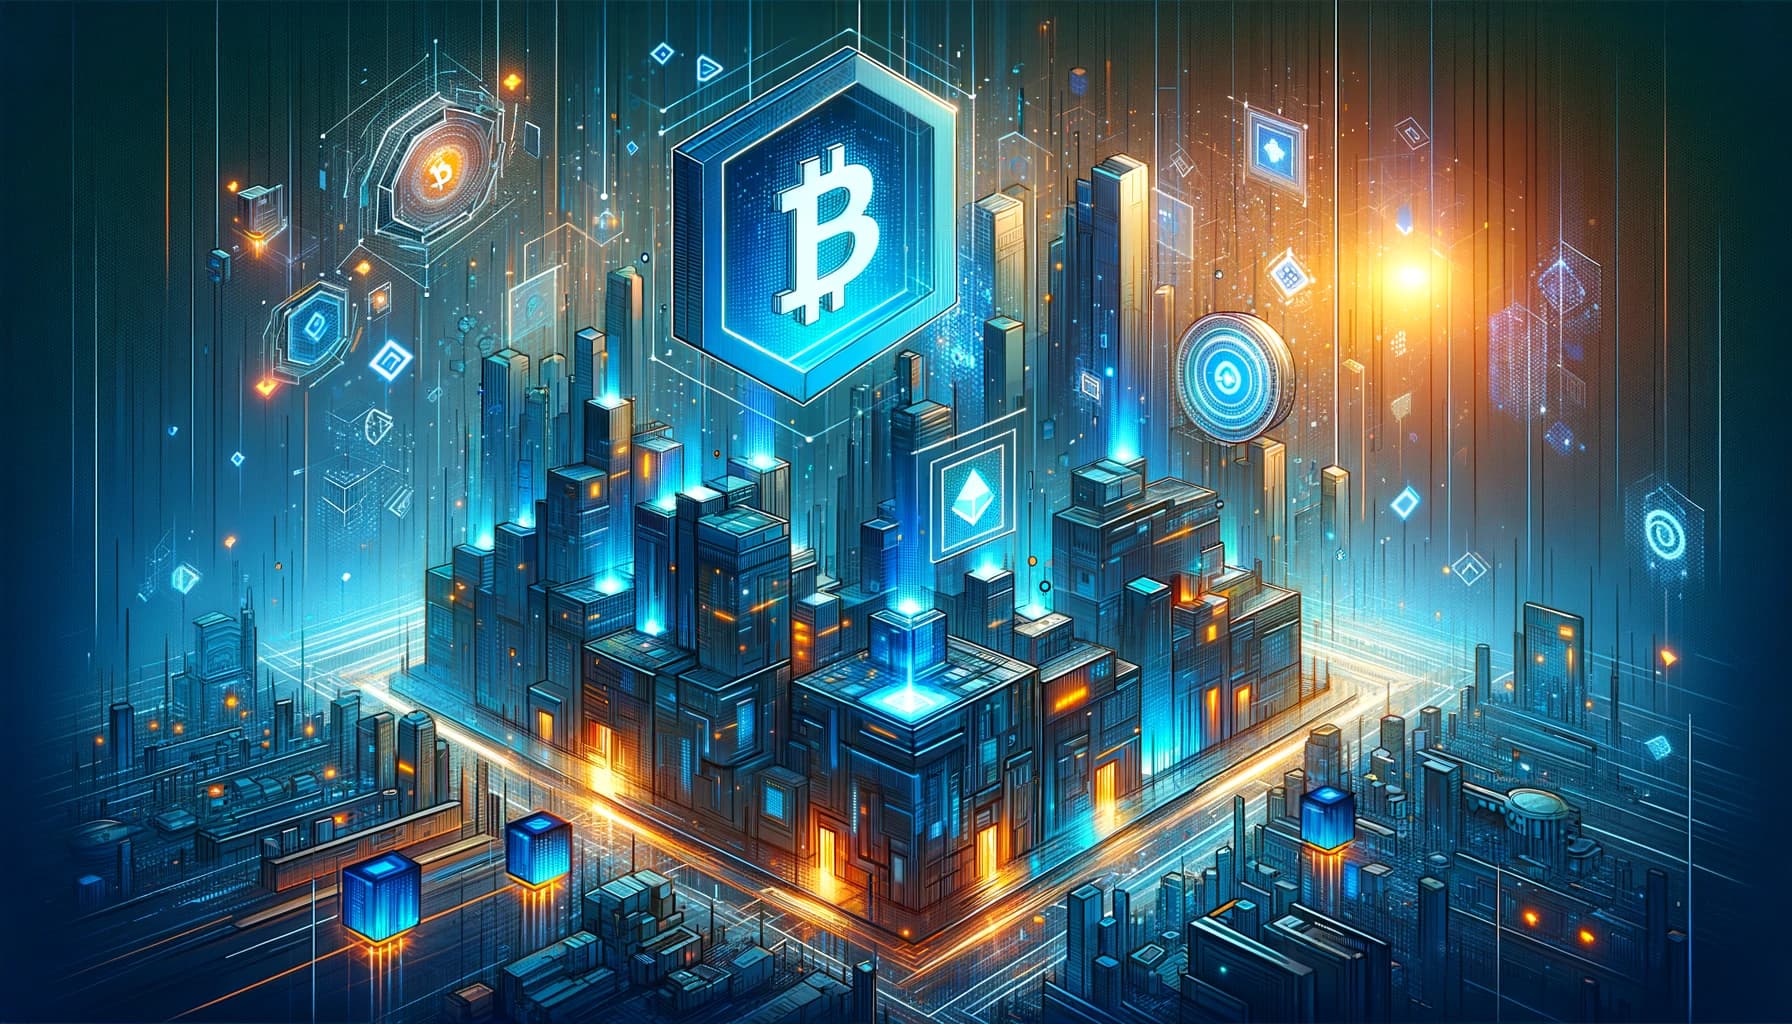 a digital city with a large floating bitcoin cube at its center.